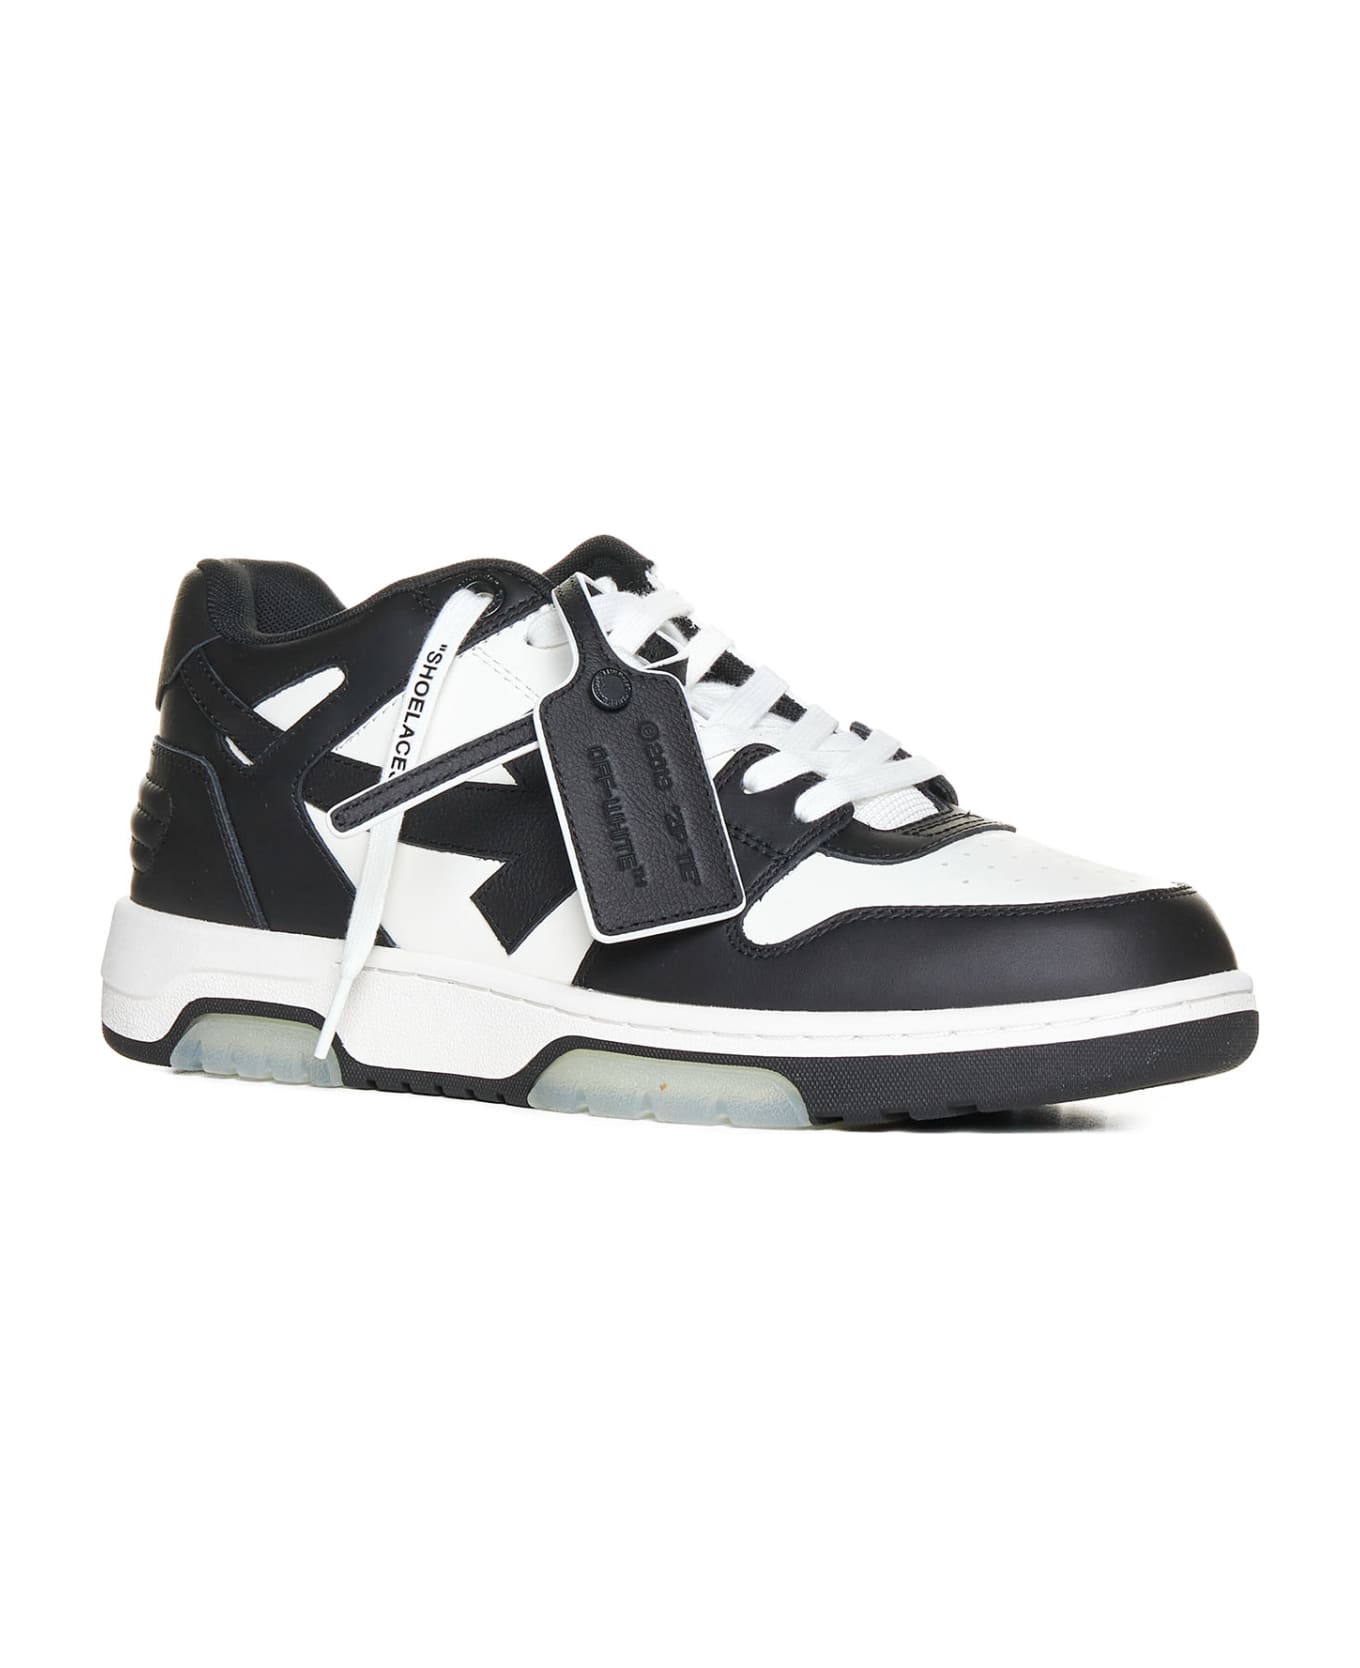 Off-White Out Of Office Sneakers - Black